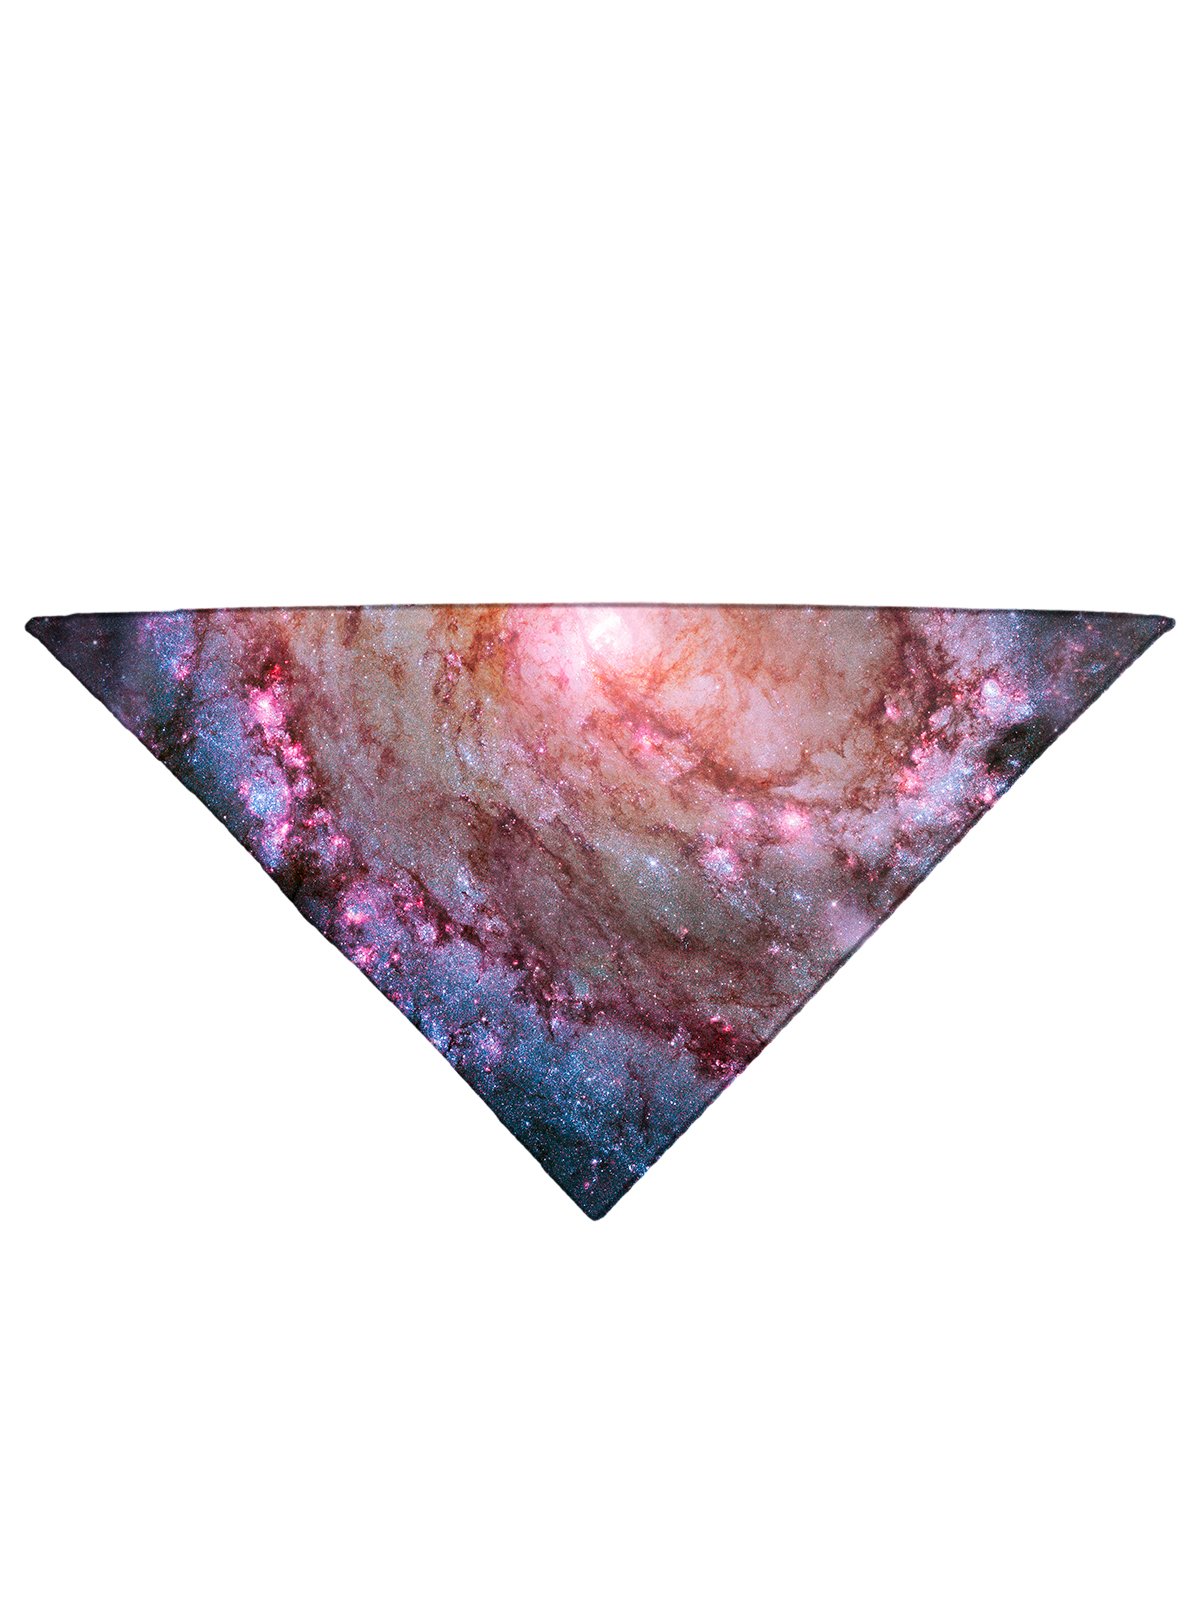 Diagonally folded psychedelic space printed headband.